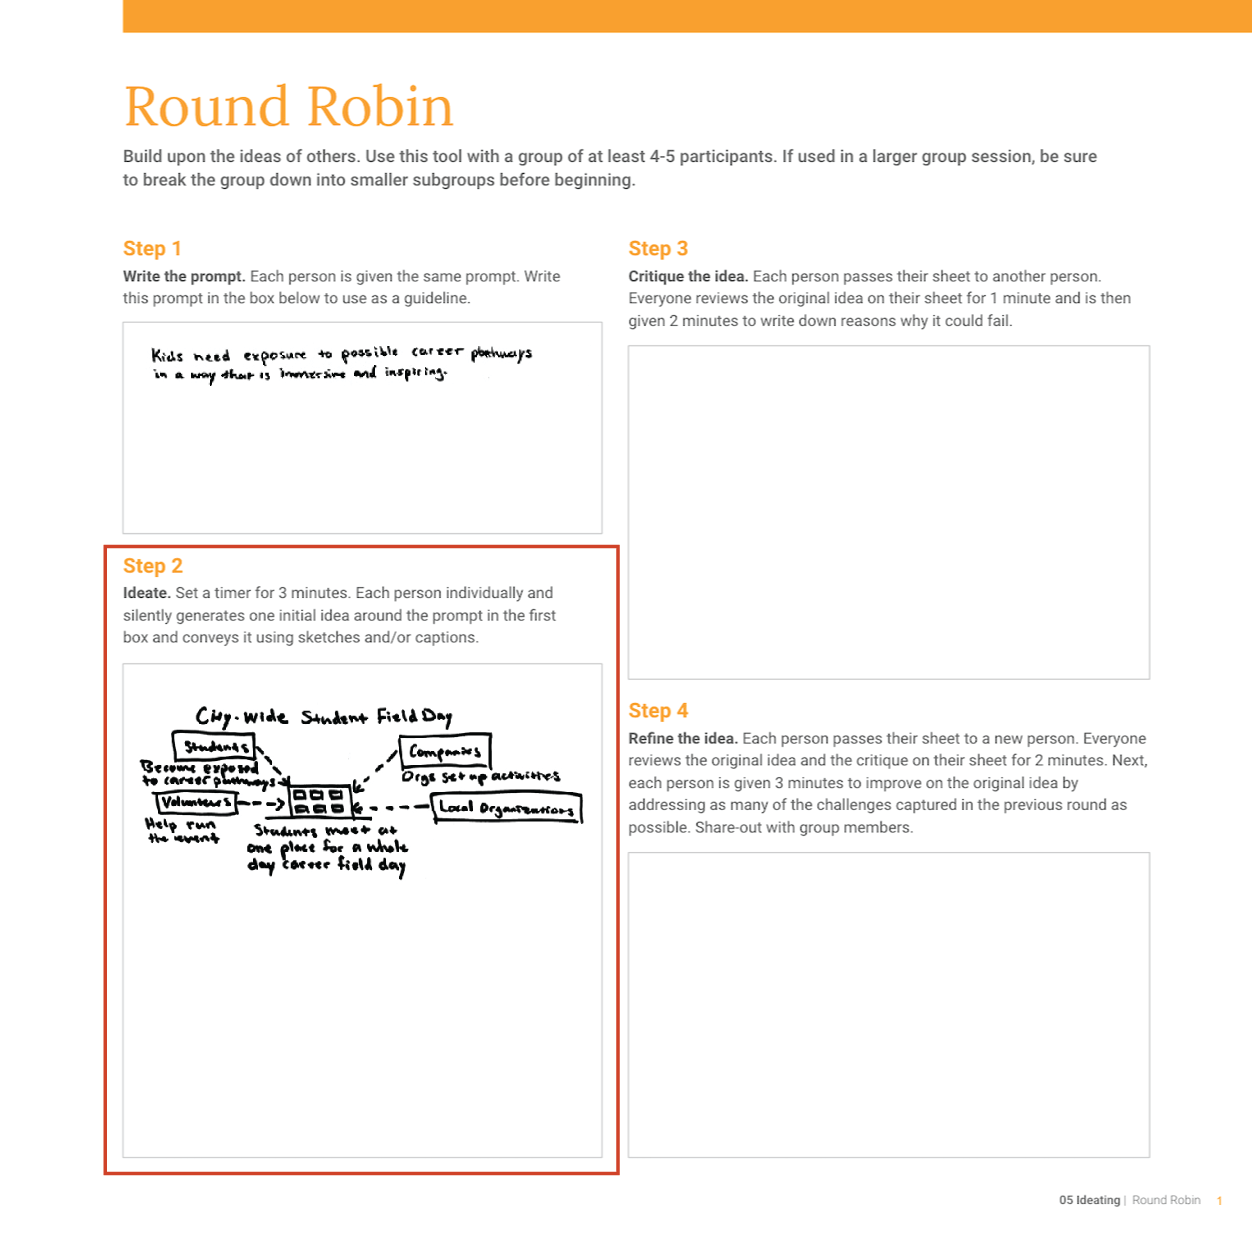 image of round robin worksheet with steps 1 and 2 filled in